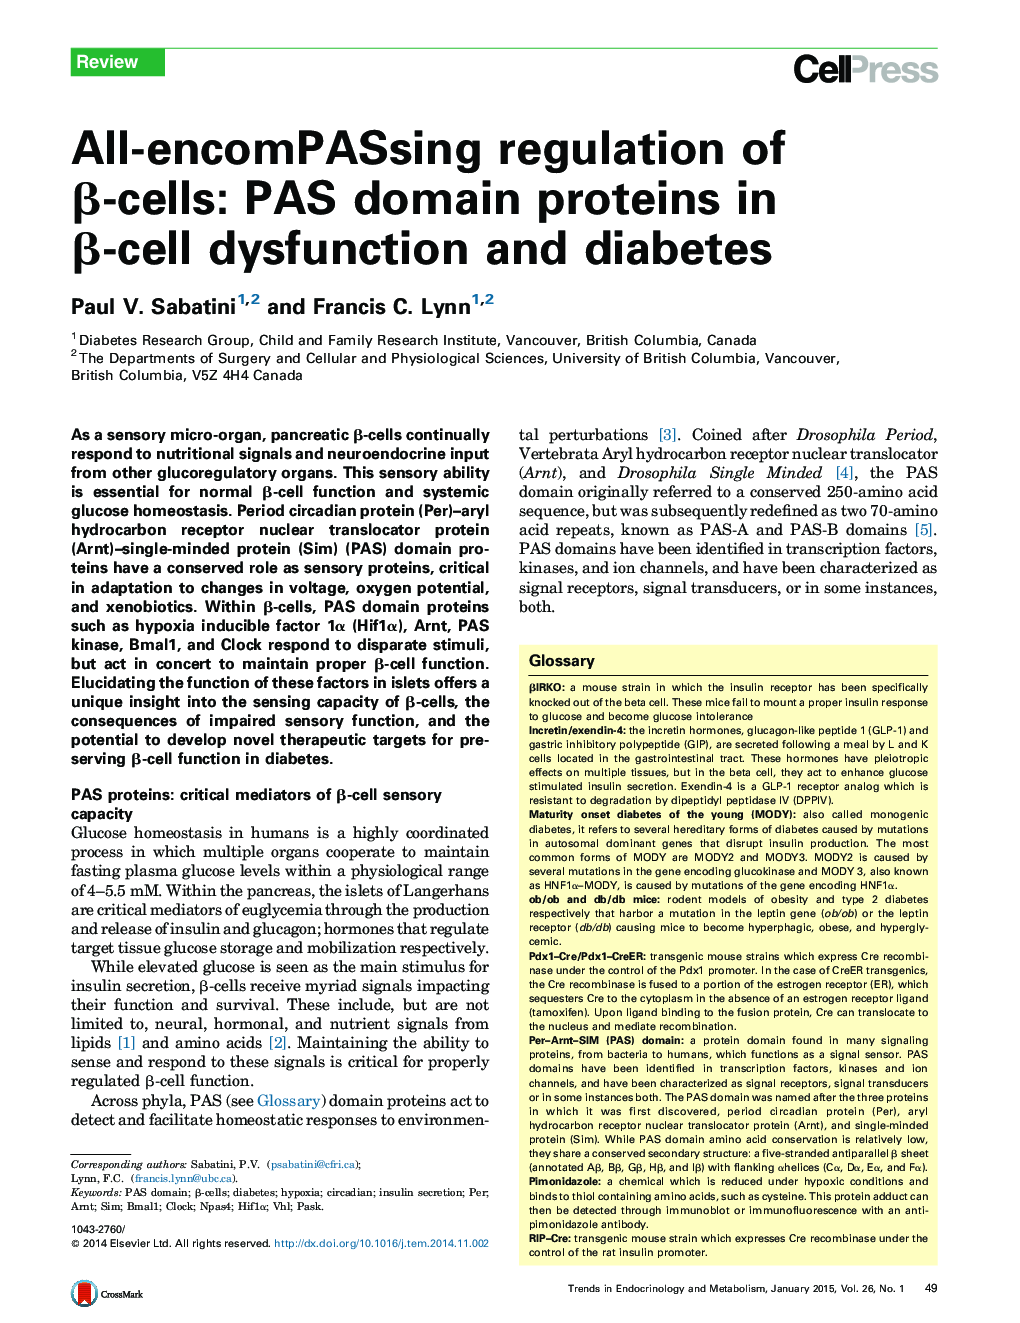 All-encomPASsing regulation of β-cells: PAS domain proteins in β-cell dysfunction and diabetes